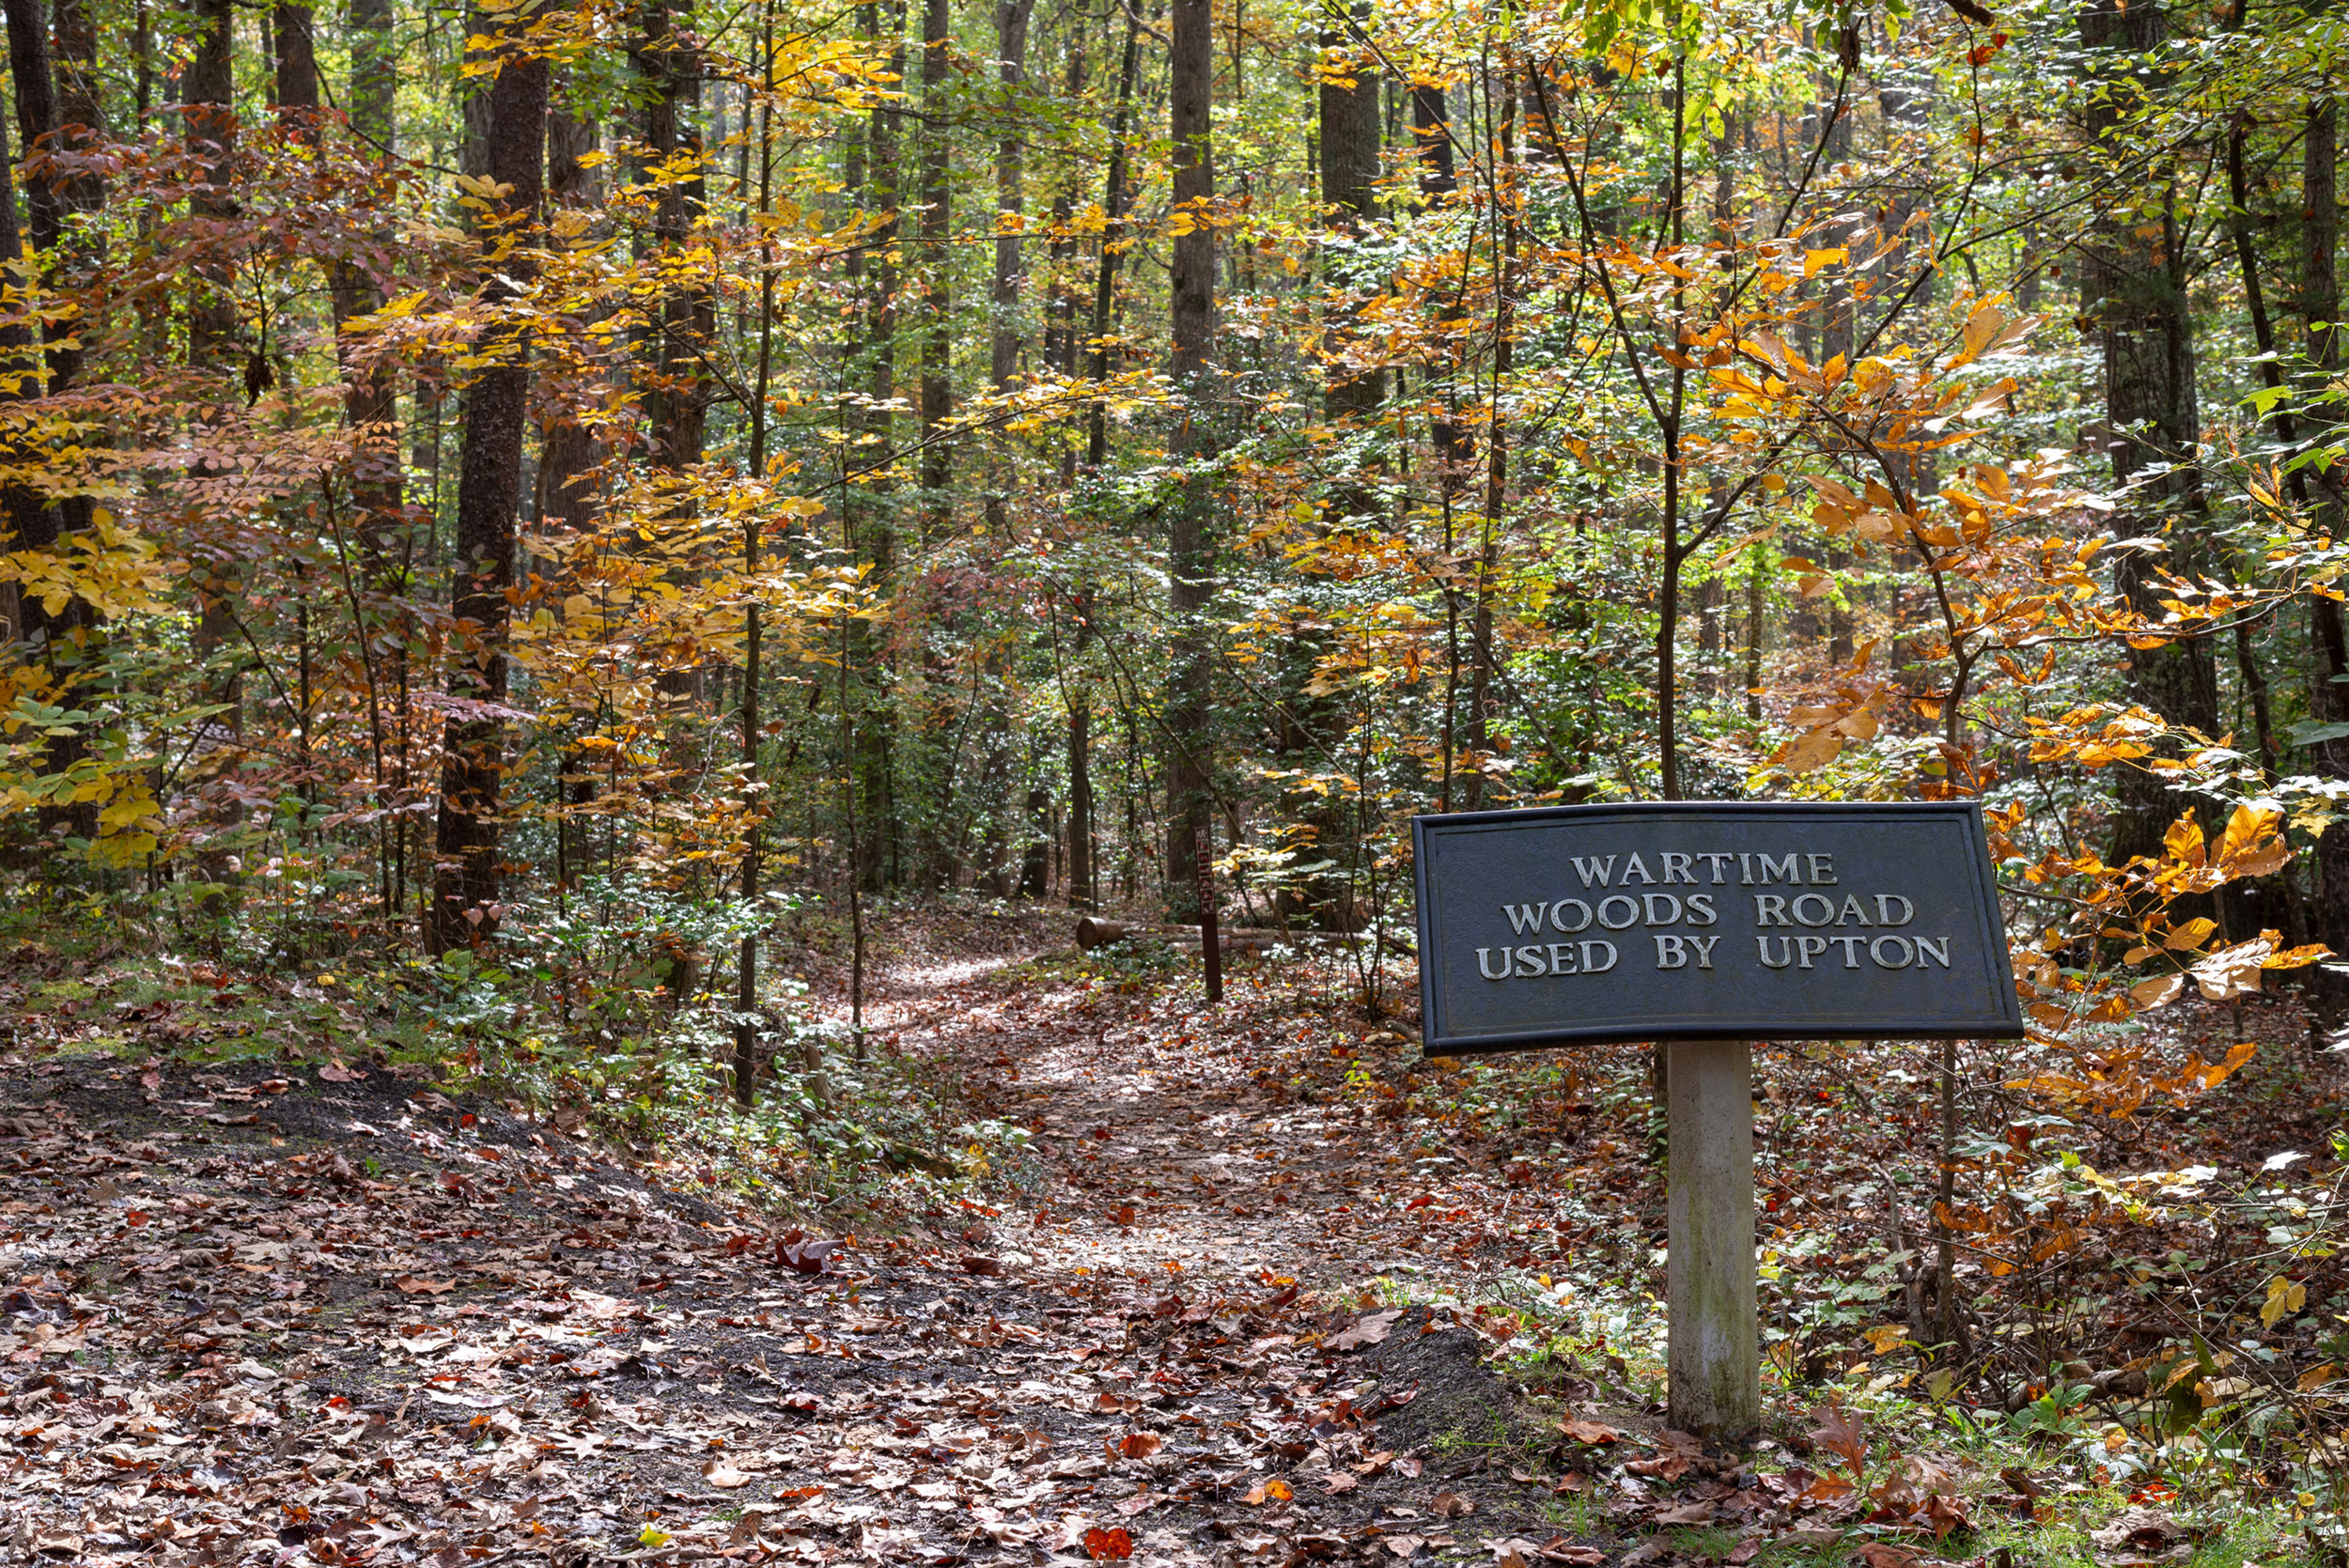 Rectangular metal sign leading to trail through the woods where Upton's soldiers marched.